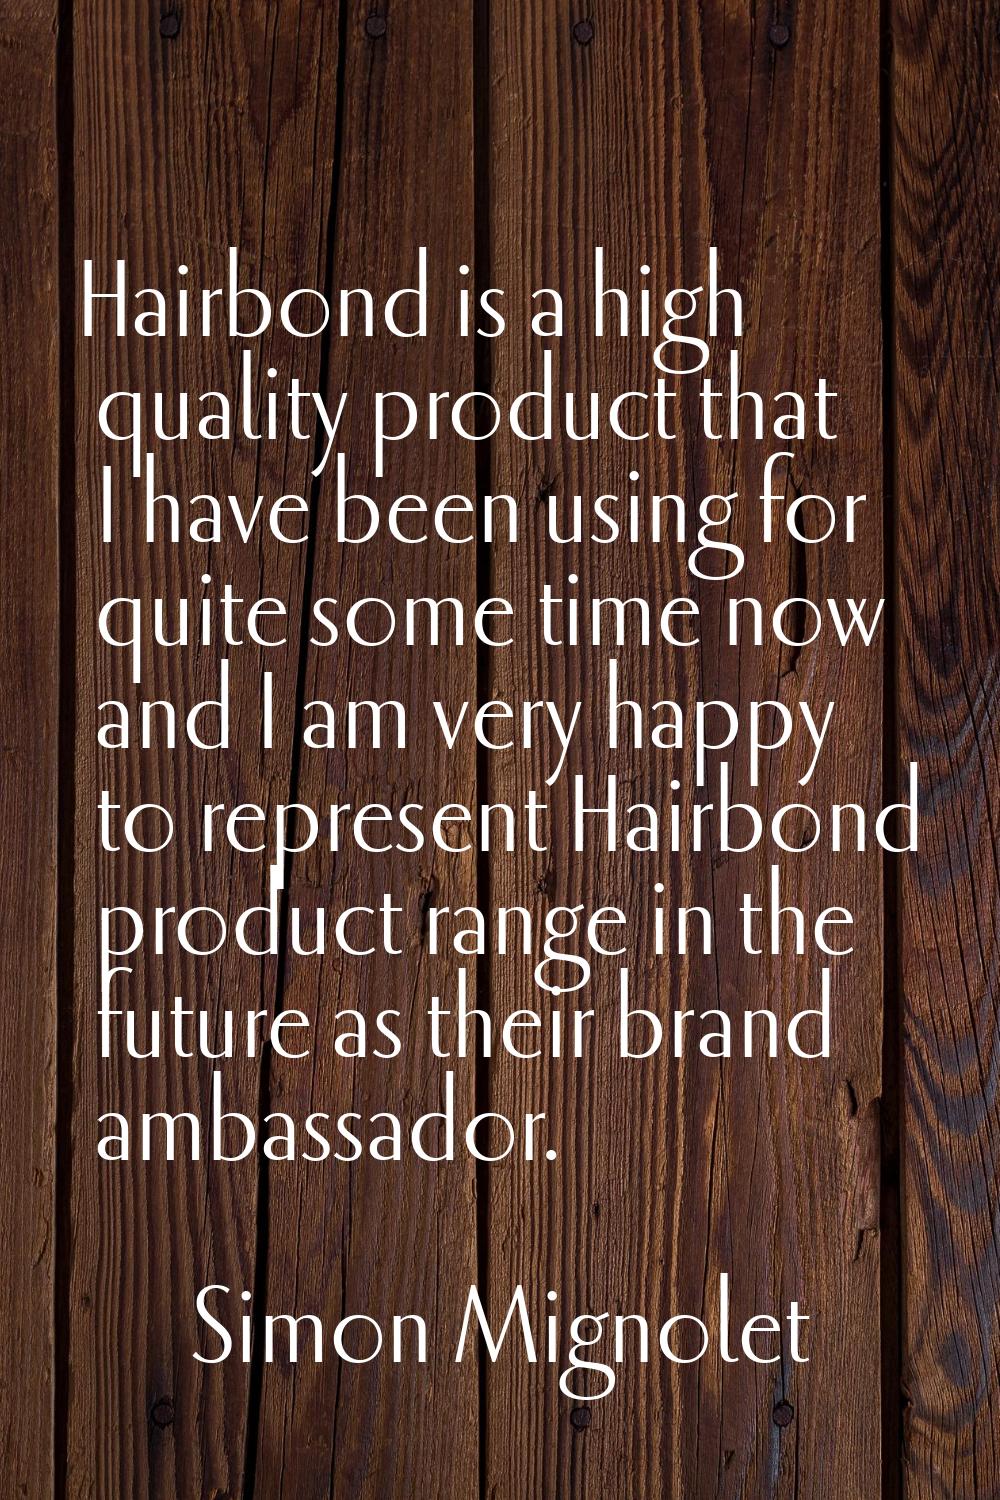 Hairbond is a high quality product that I have been using for quite some time now and I am very hap